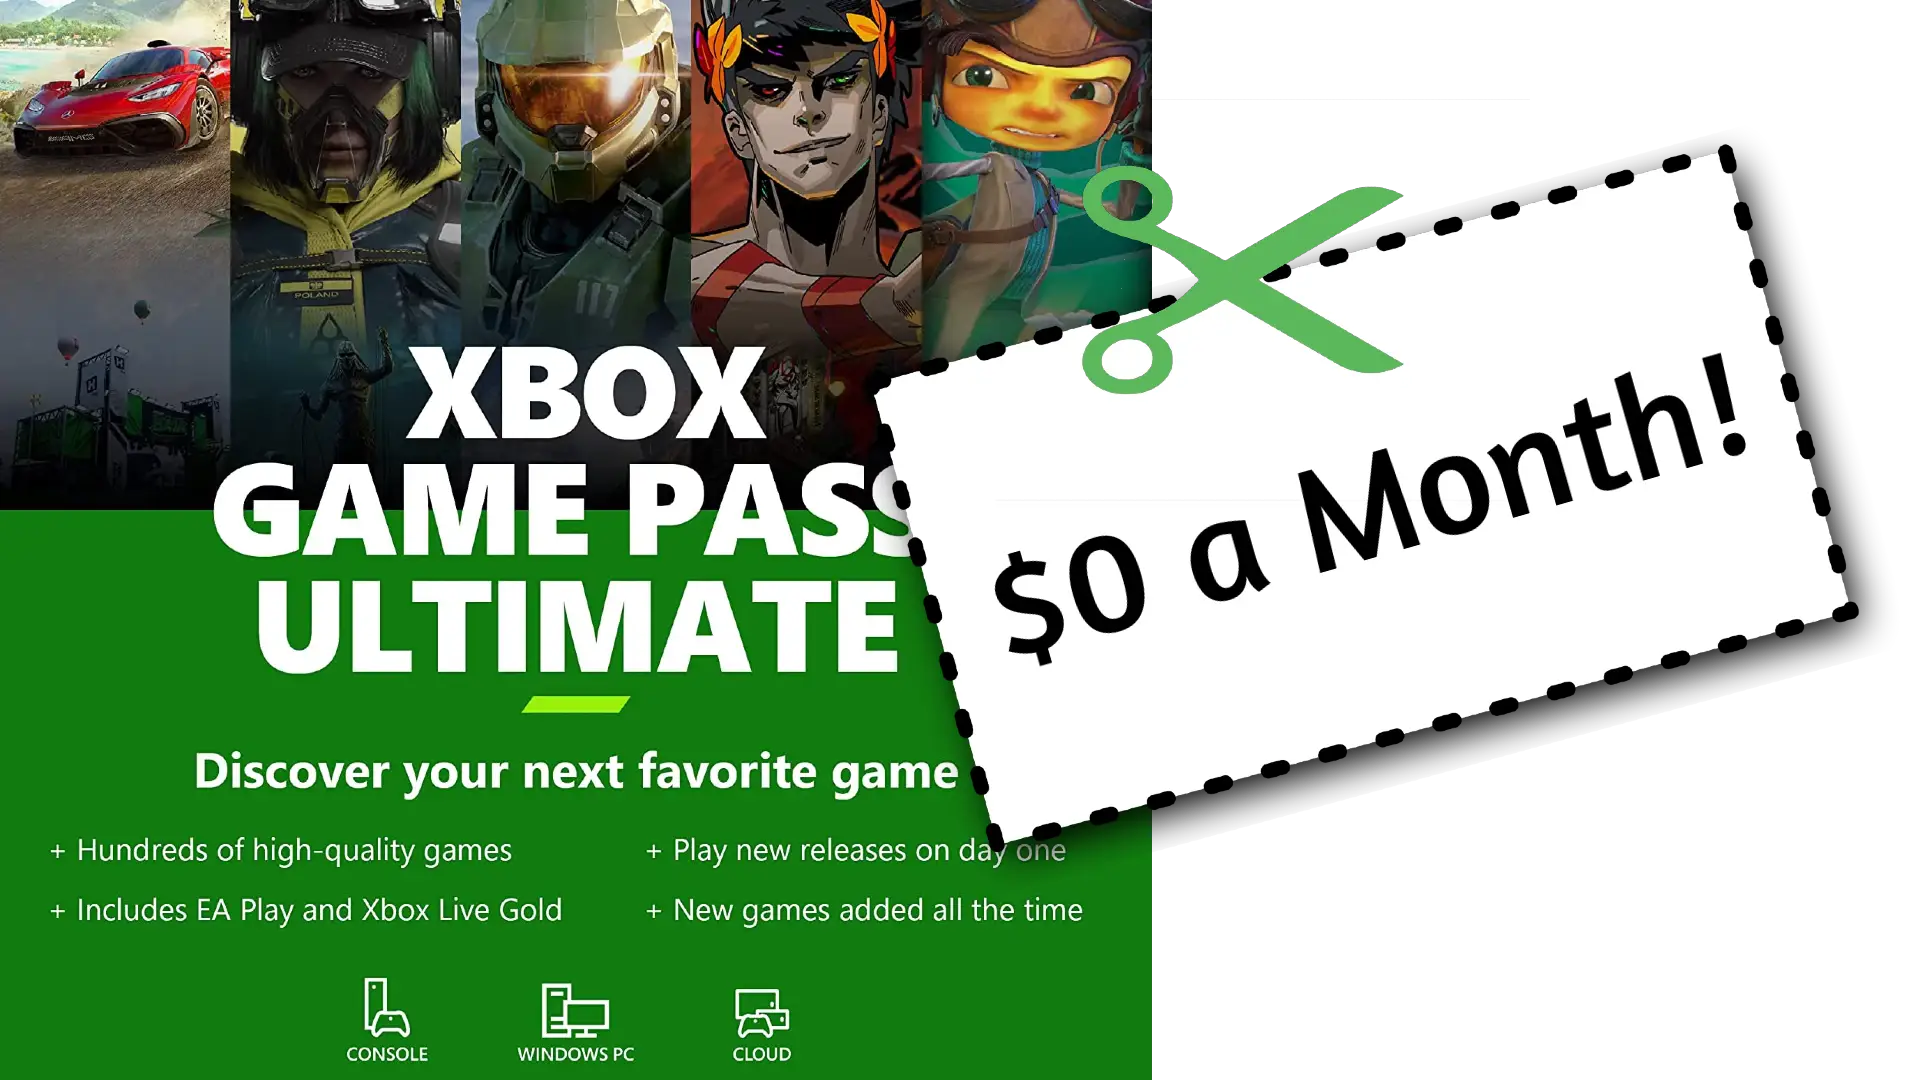 Xbox Game Pass Is Practically Free in End of 2023 Deal